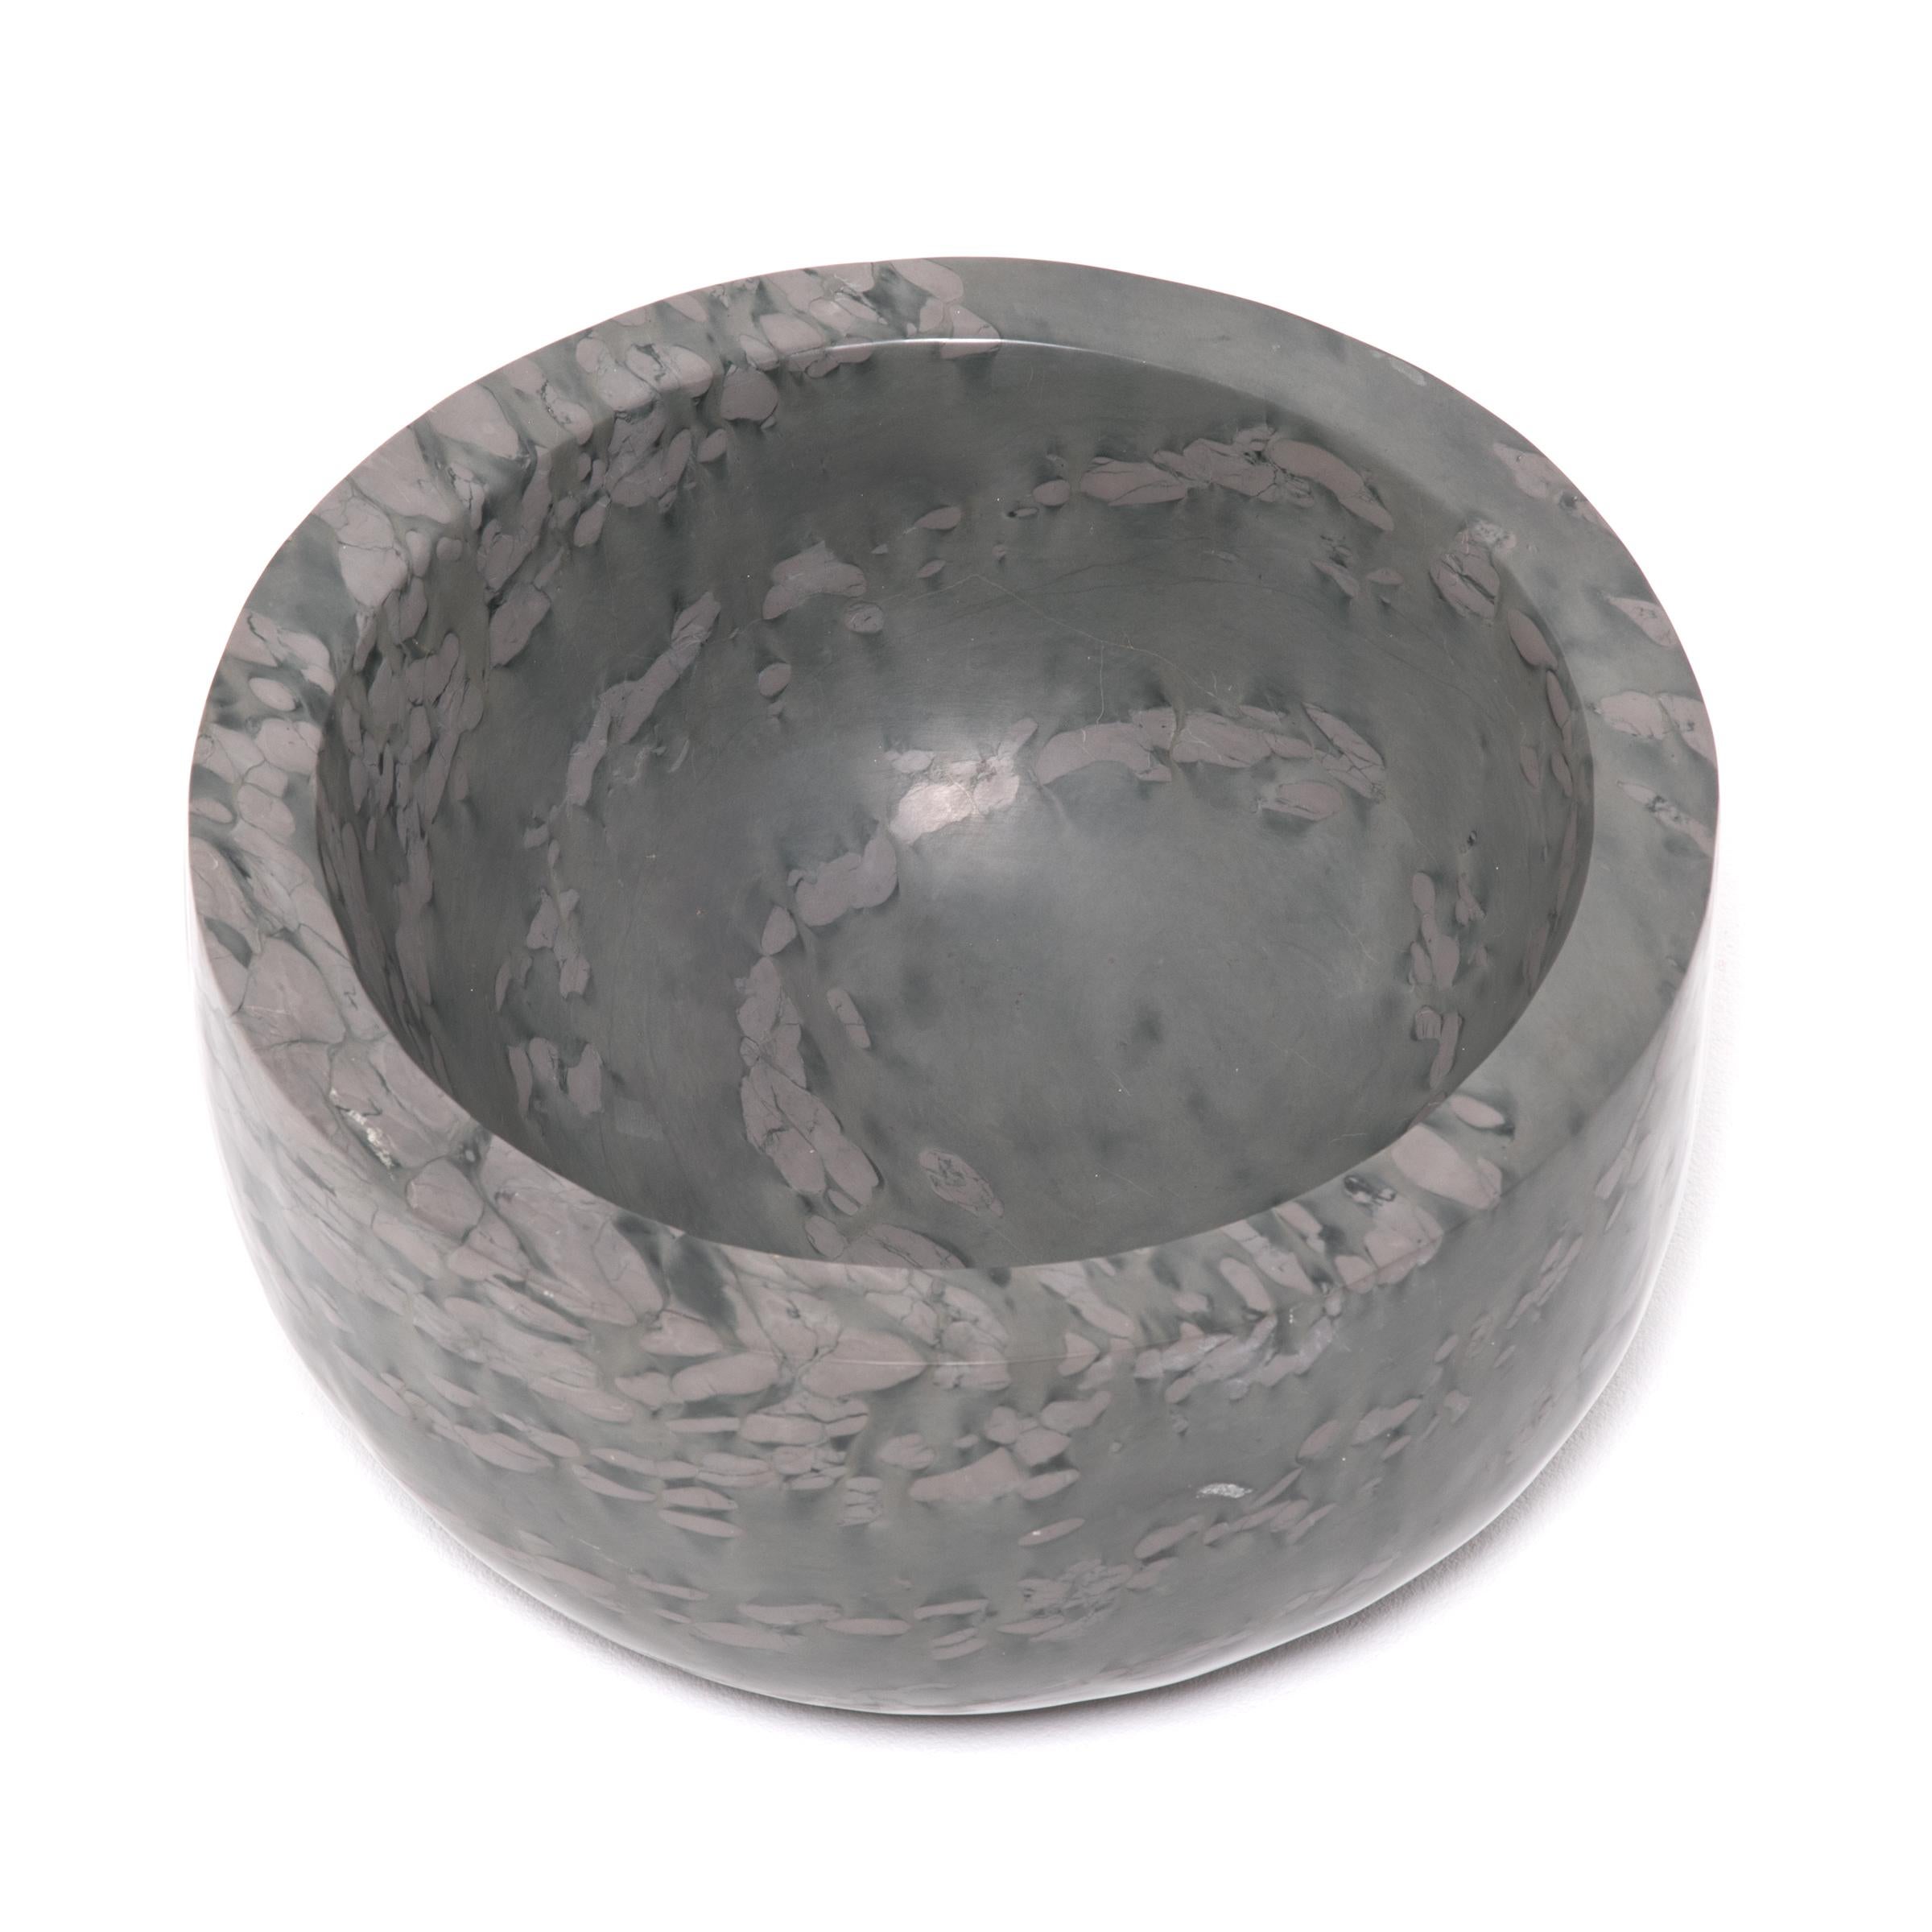 A clean-lined interpretation of an ancient form, this footed basin was hand carved by artisans in China's Shandong province. The mesmerizing pattern of zhenzhu is inherent to the stone, a conglomerate limestone extracted from Lake Tai in Jiangsu